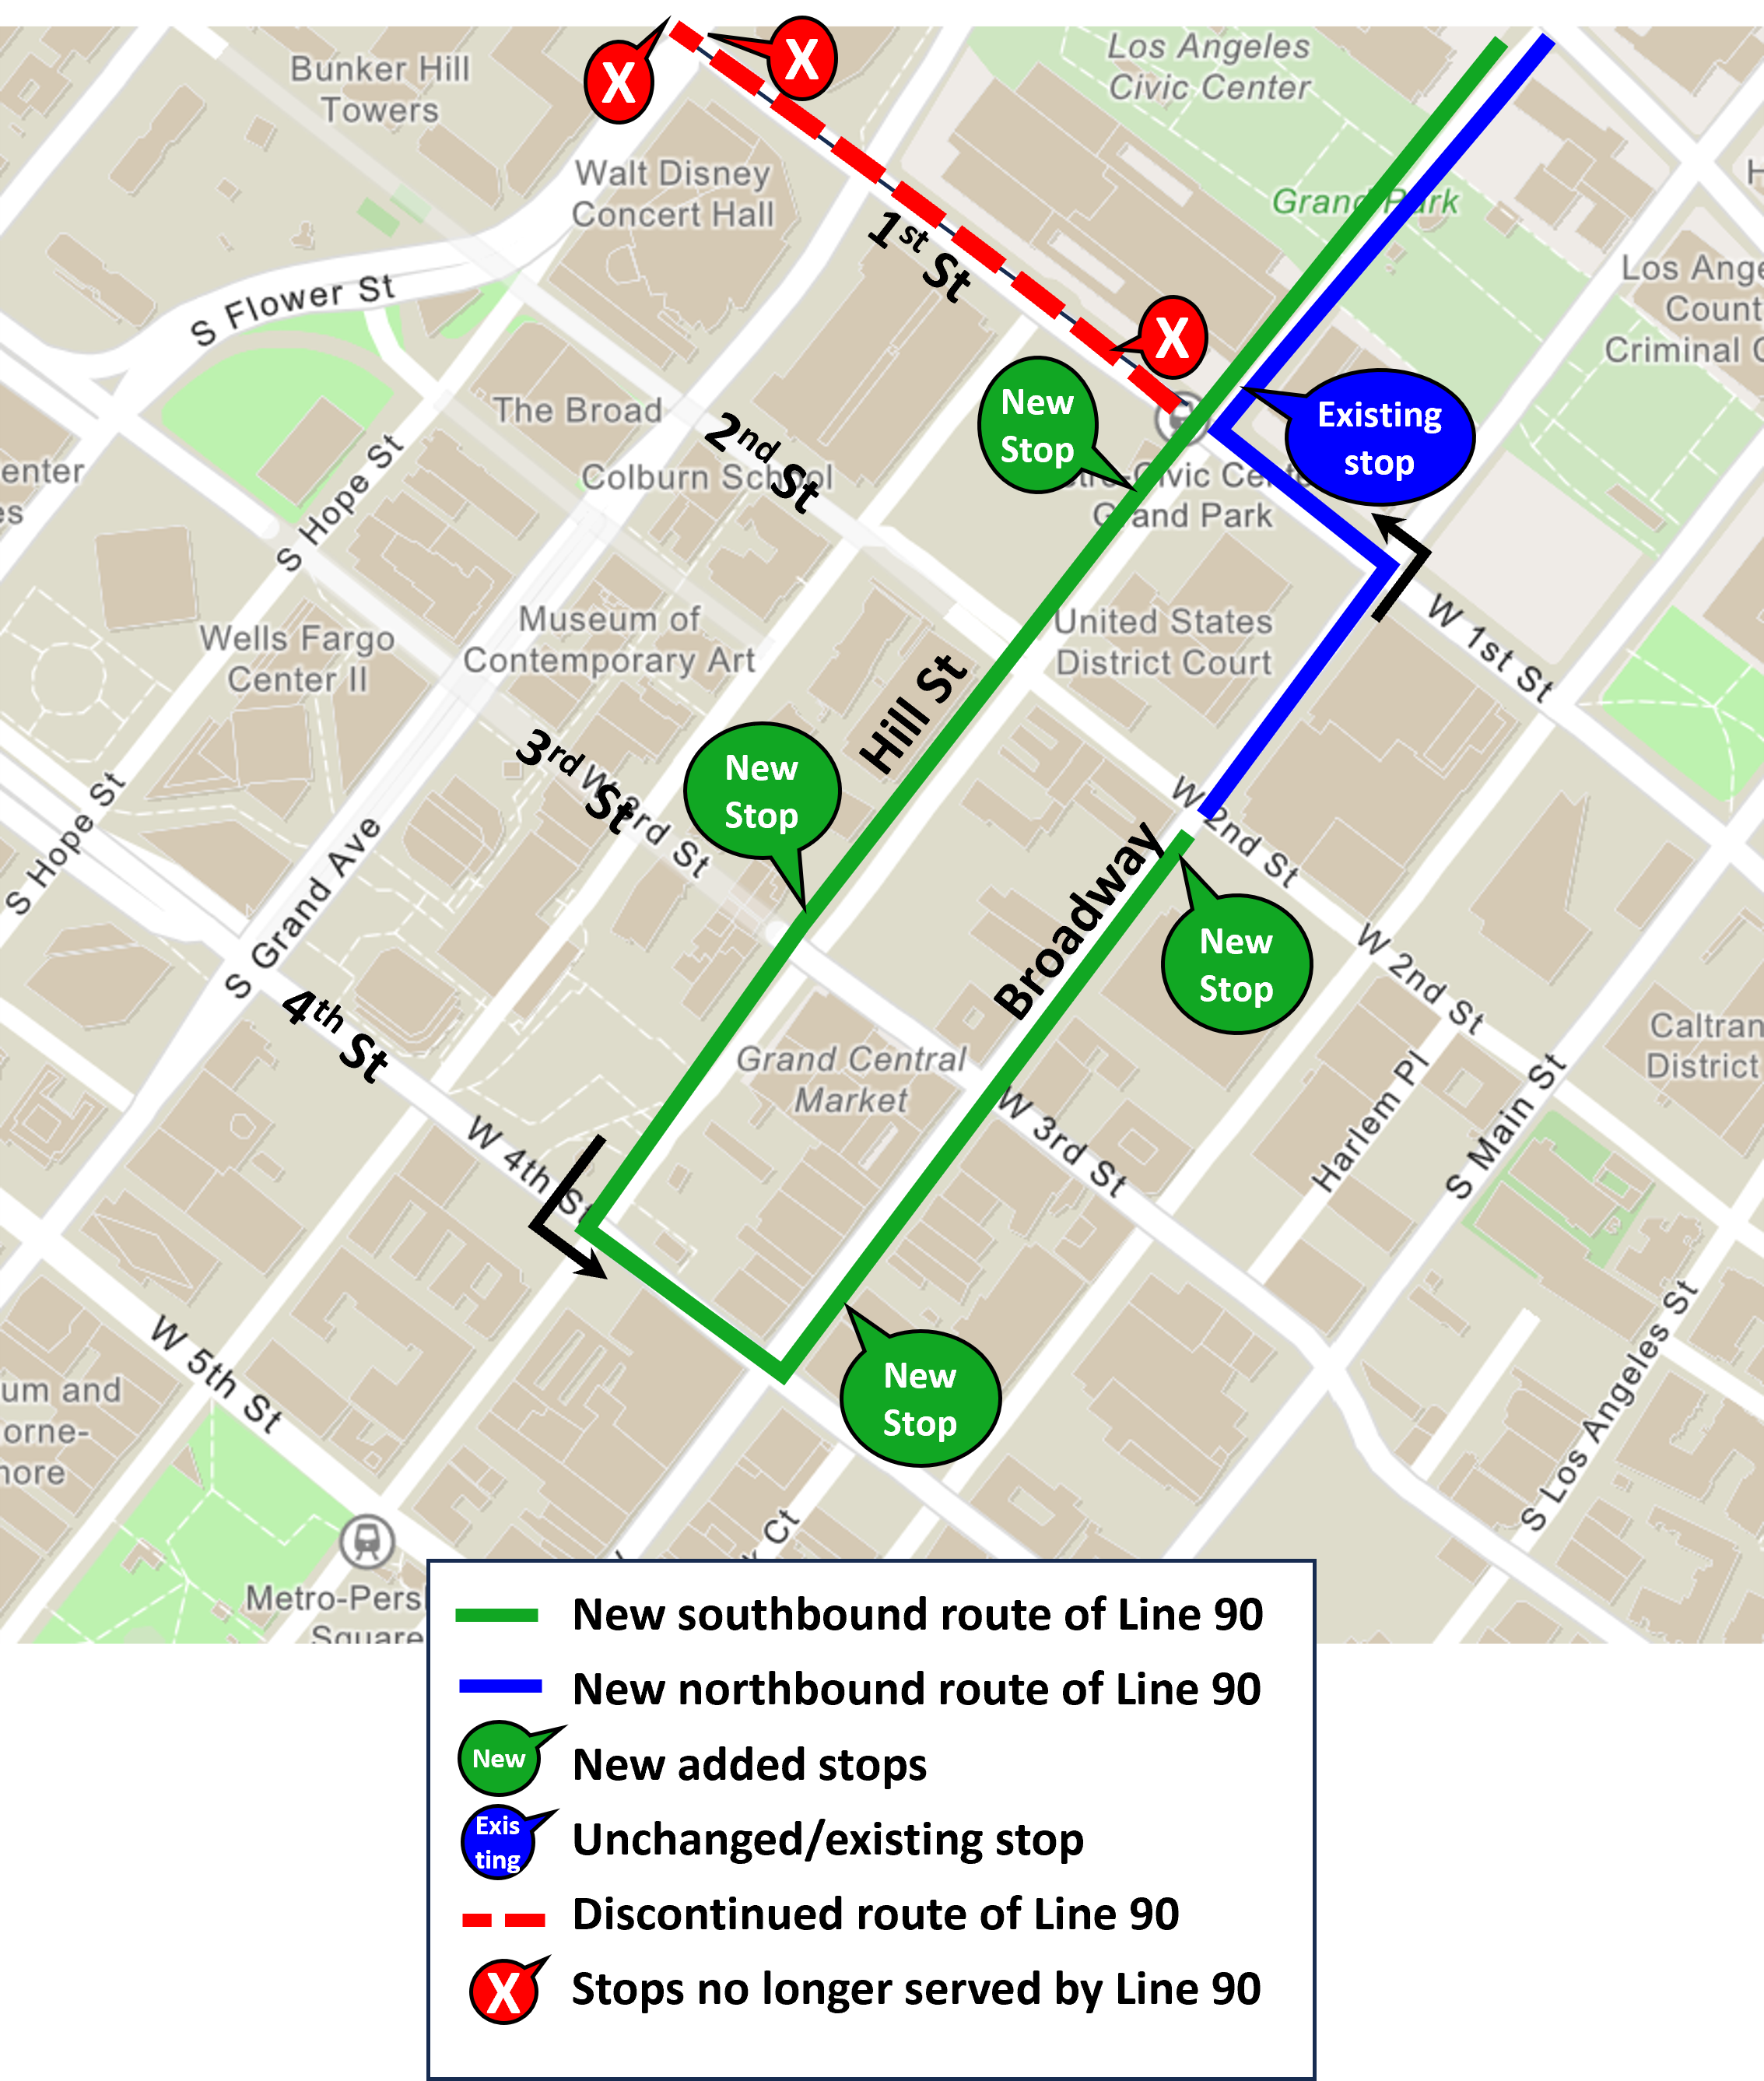 a graphic map showing a visual representation of the described changes to Line 90